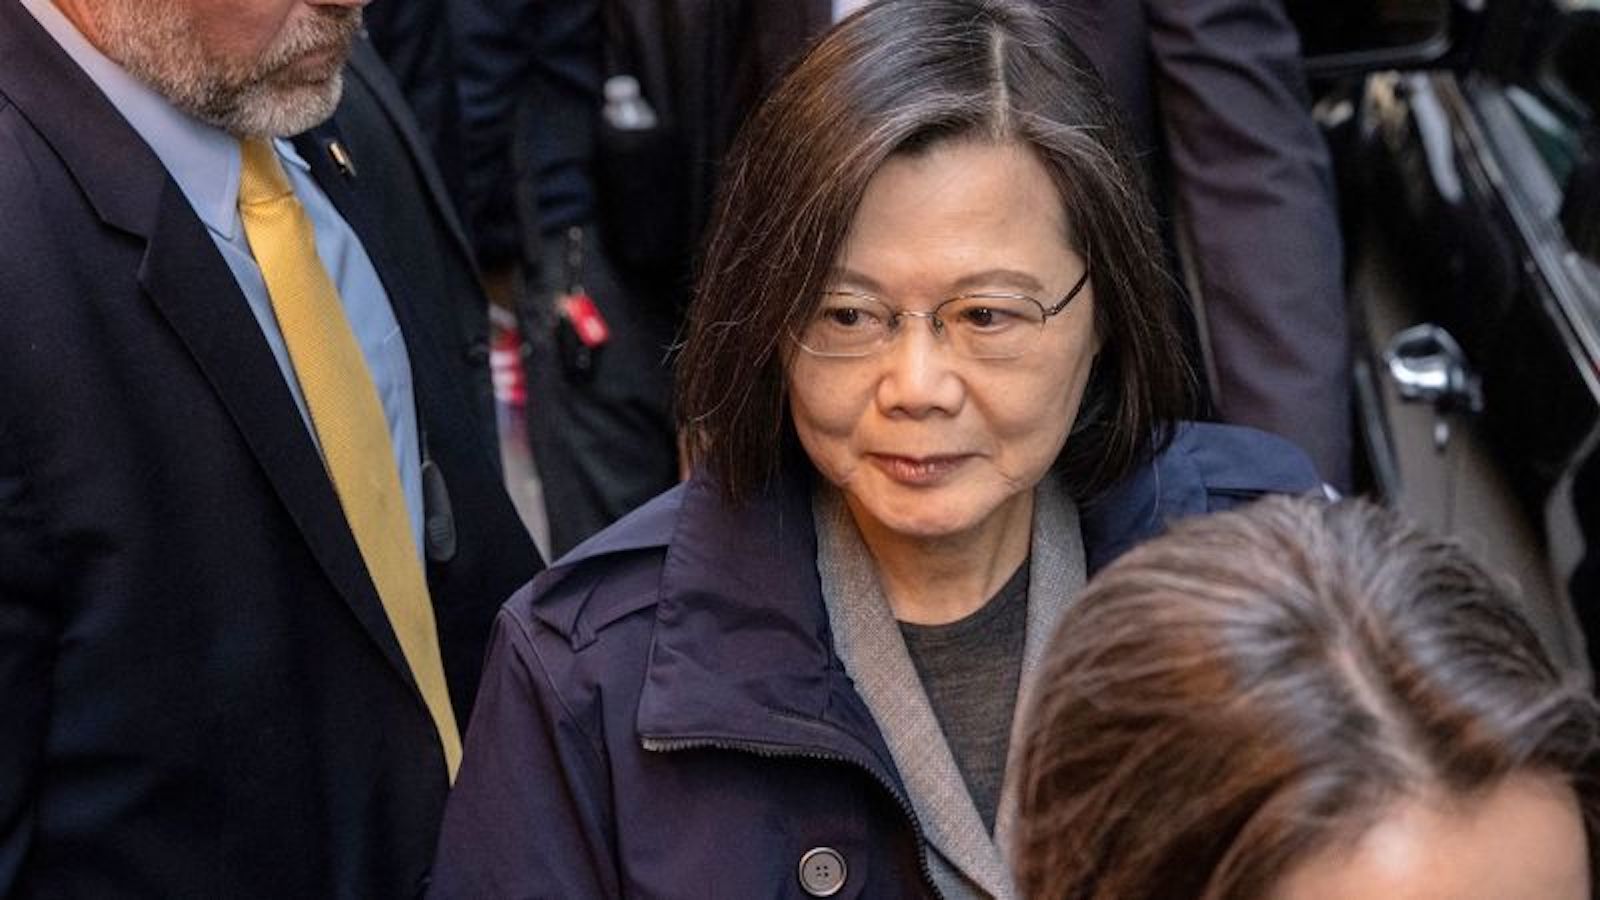 Beijing warns Taiwan president’s New York trip will have “severe impact” on US-China ties